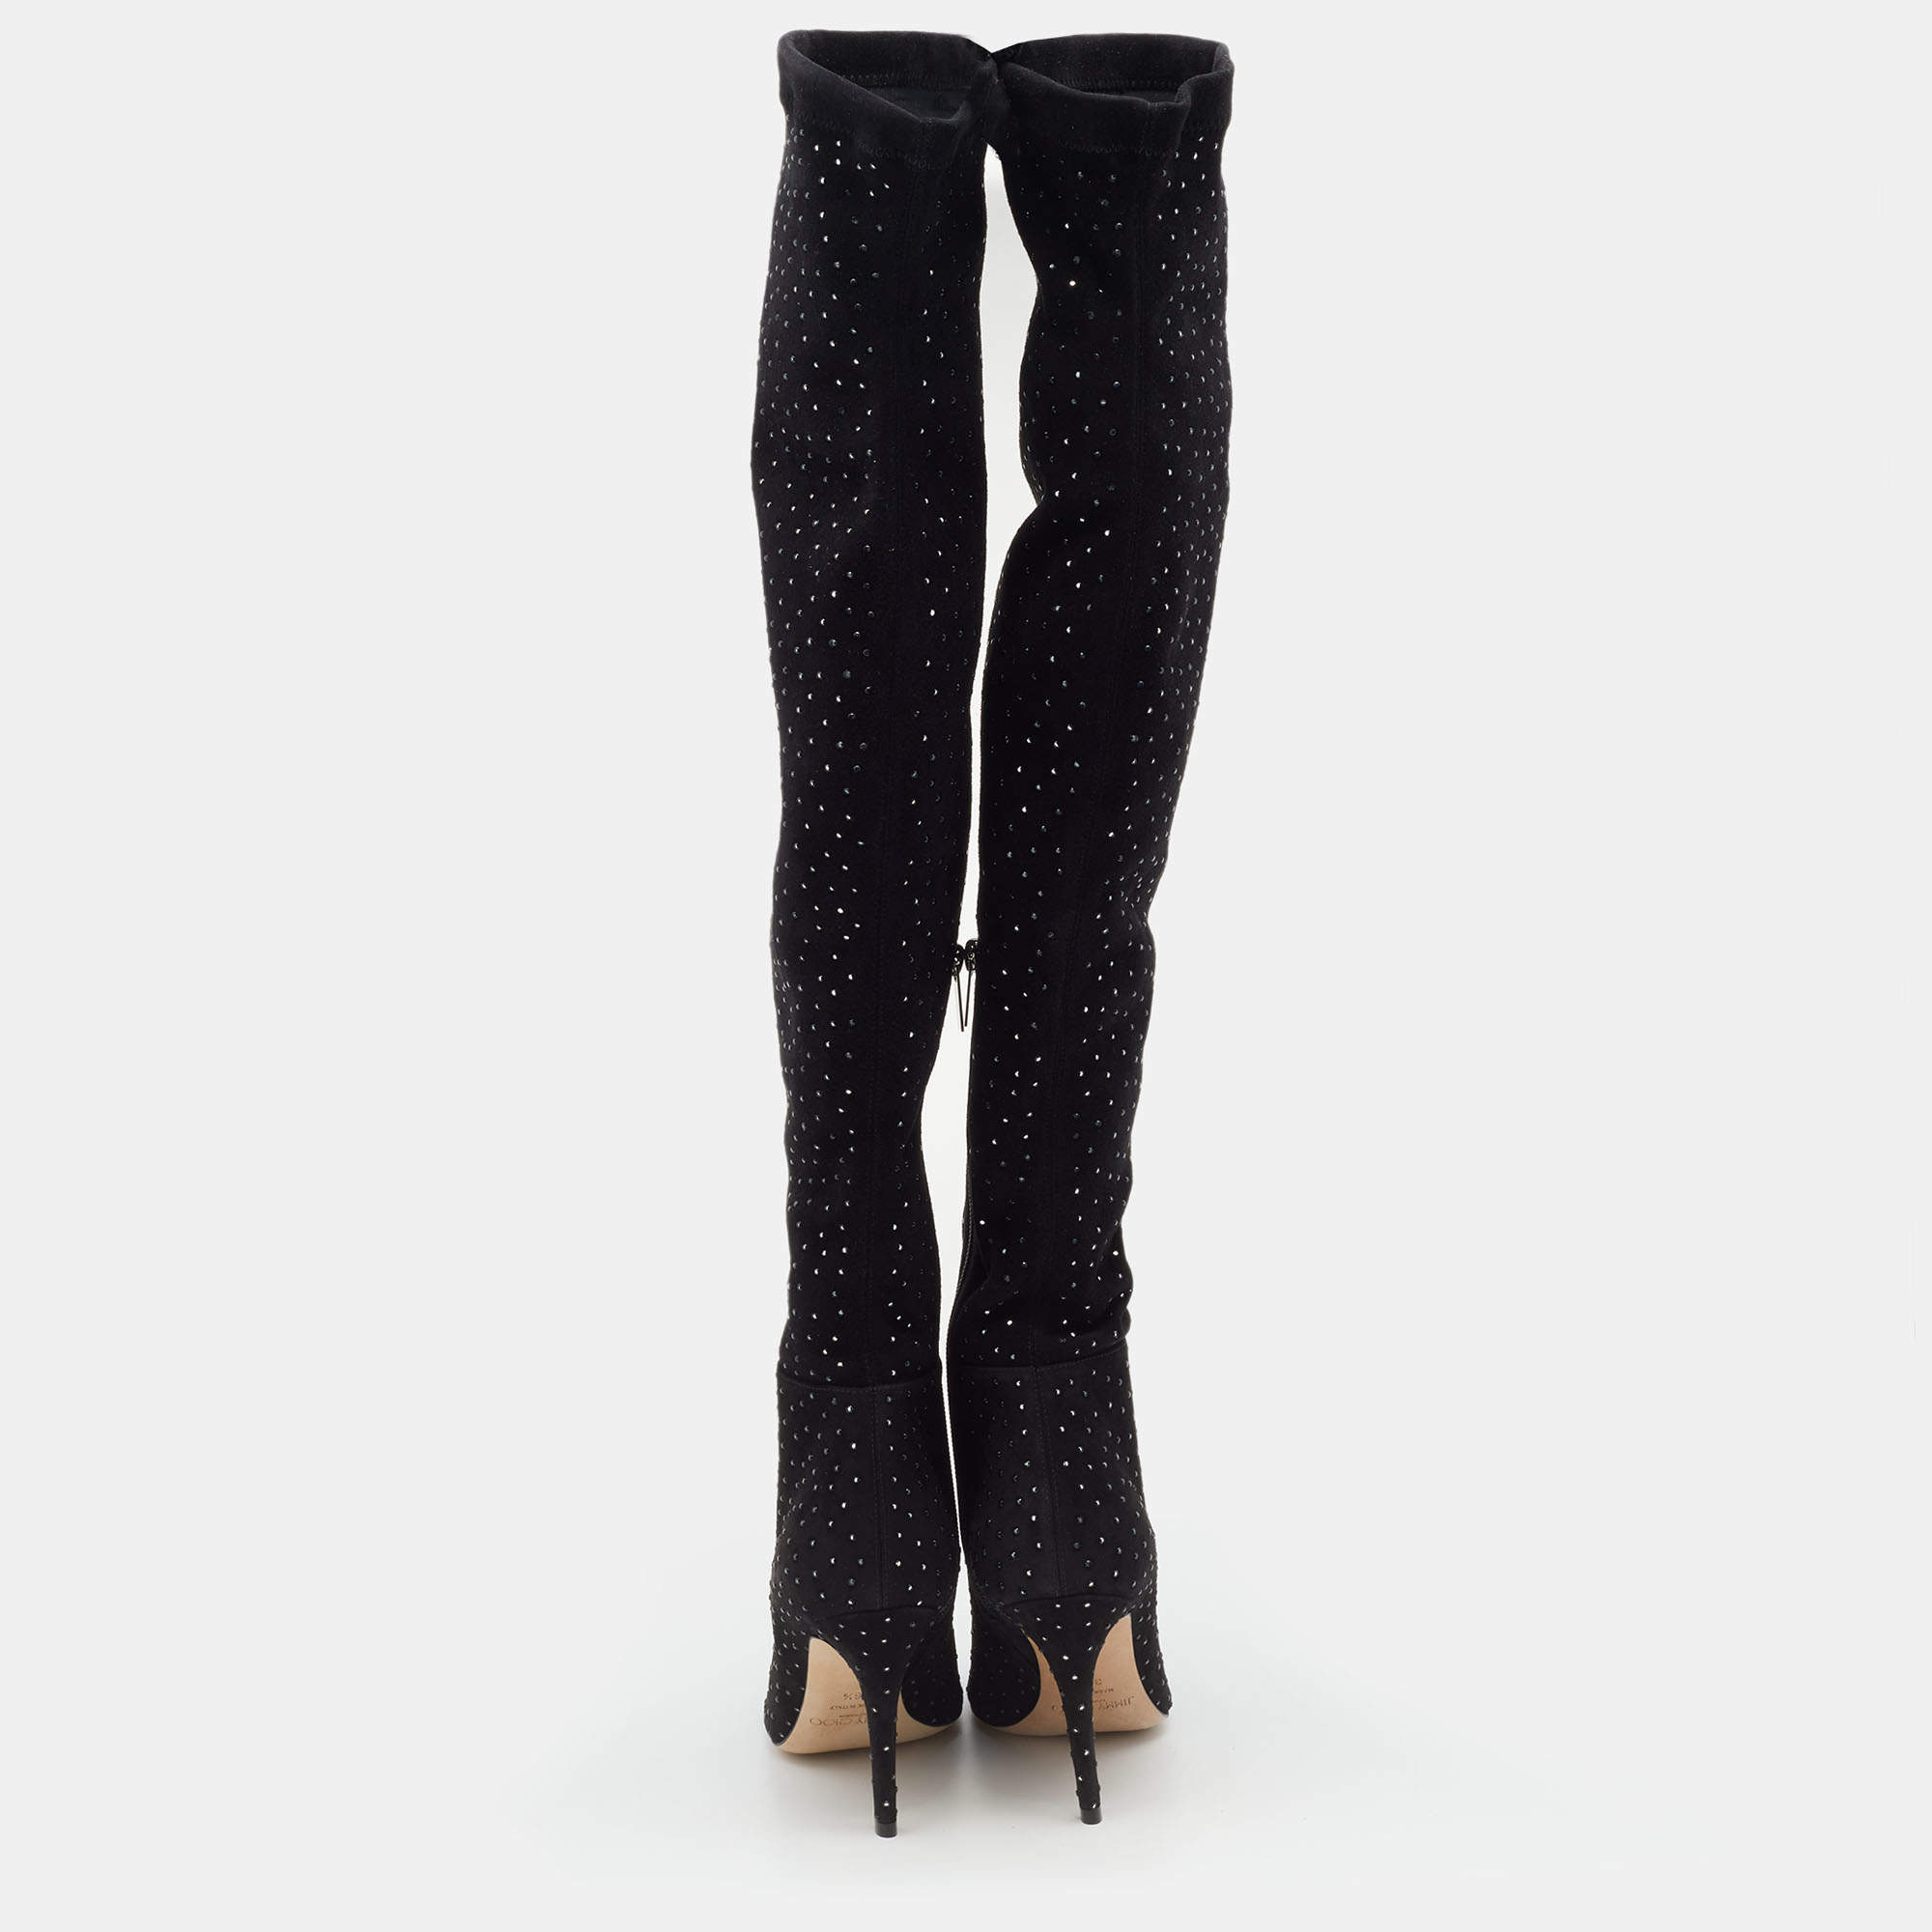 Black Cycas leather knee-high boots | Jimmy Choo | MATCHES UK